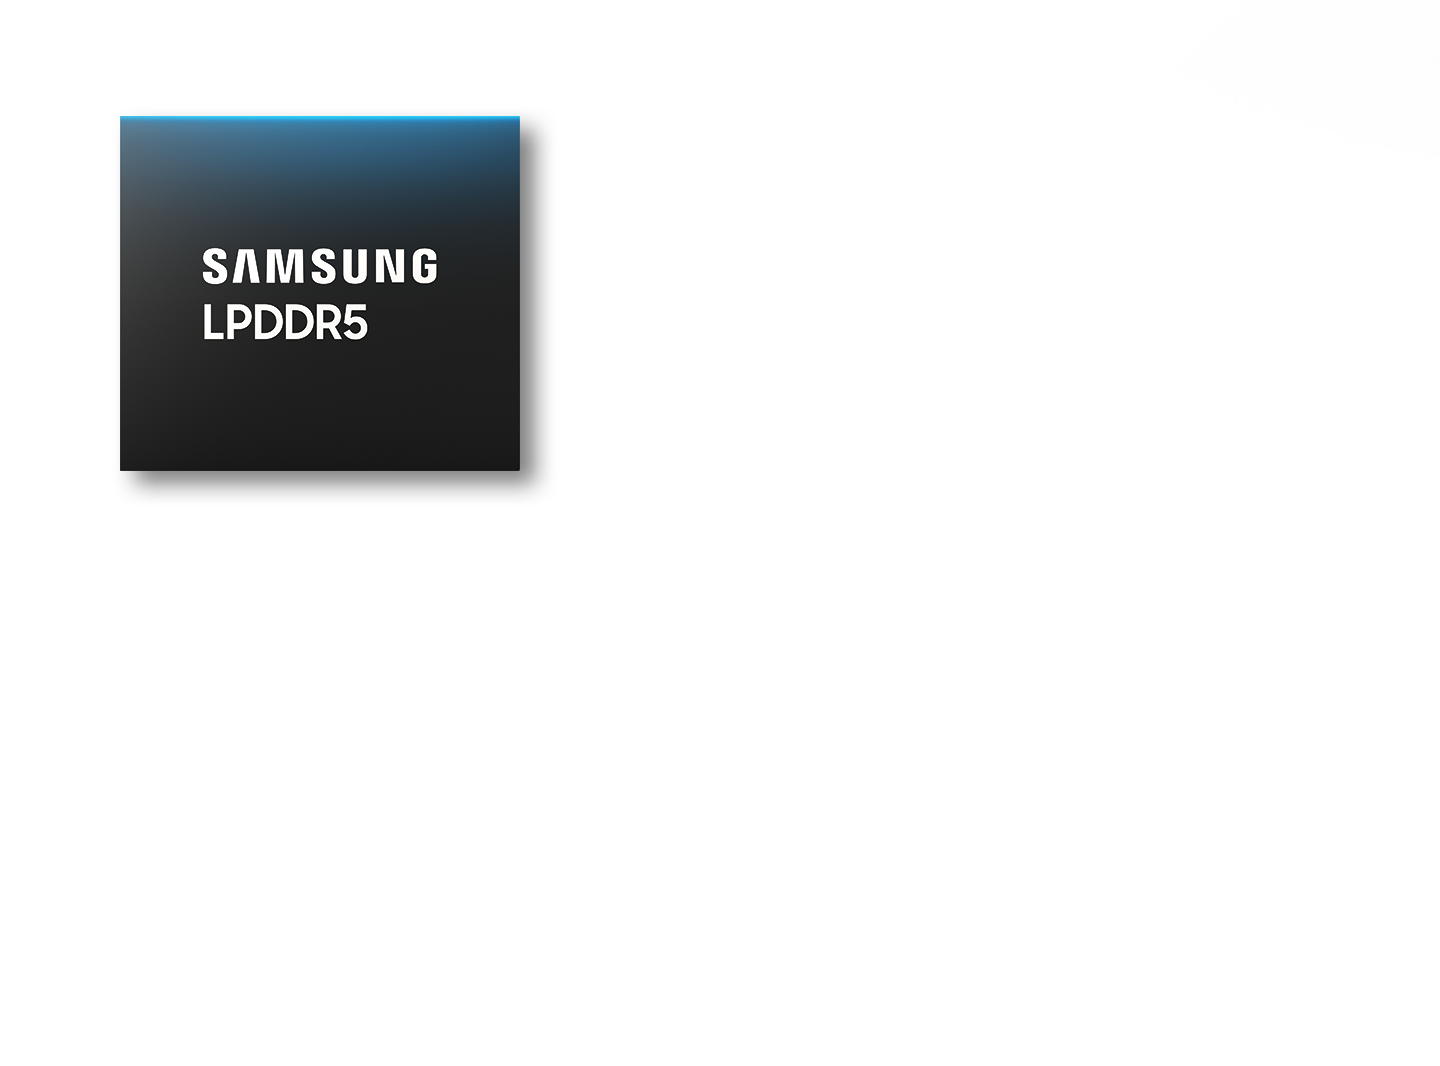 Samsung LPDDR5 against an image of 5G and AR map.